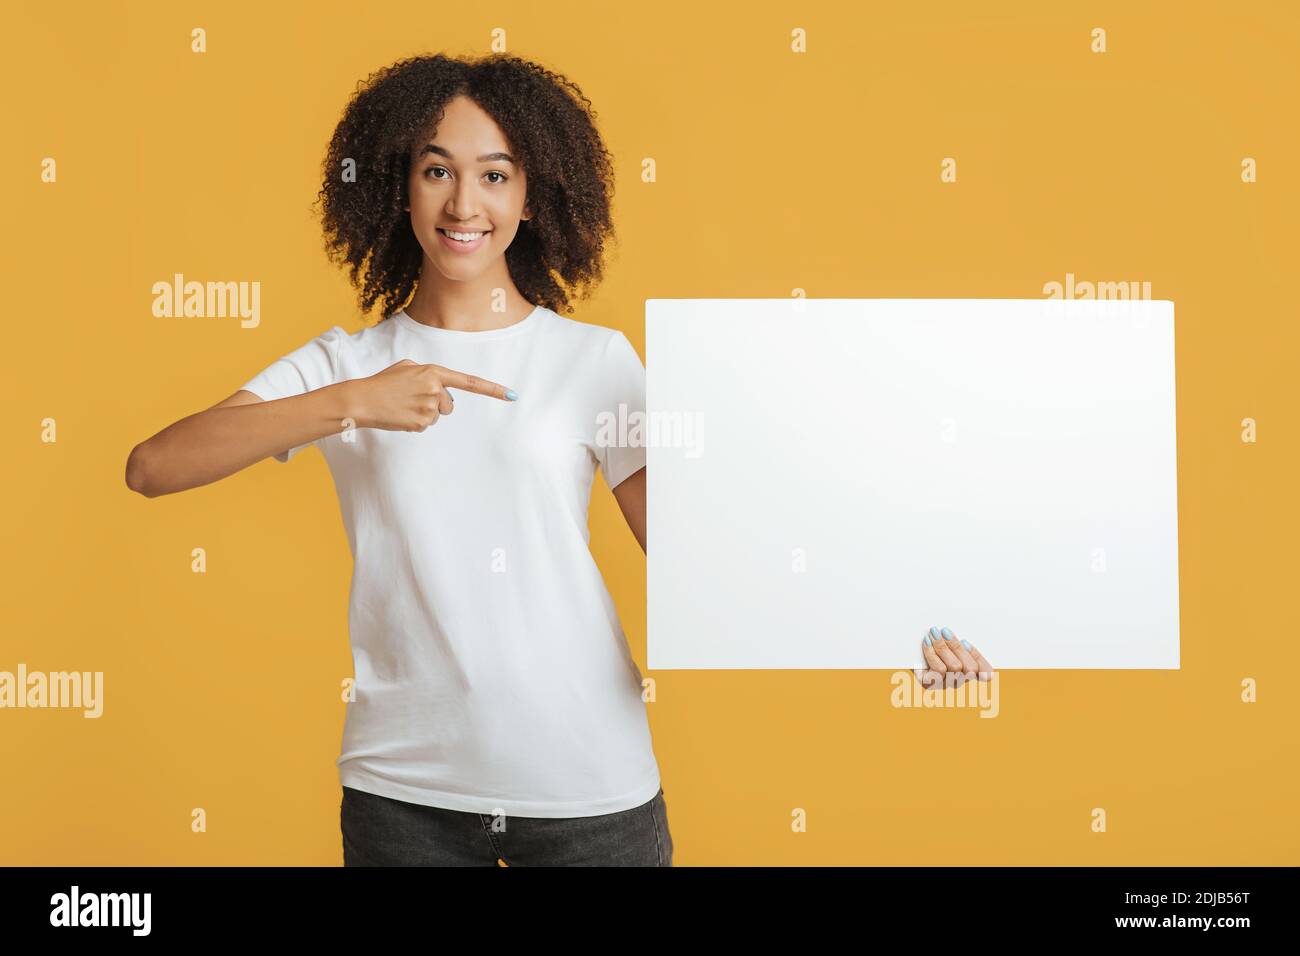 Advertising space and customer advice. Smiling woman holding banner with blank space Stock Photo